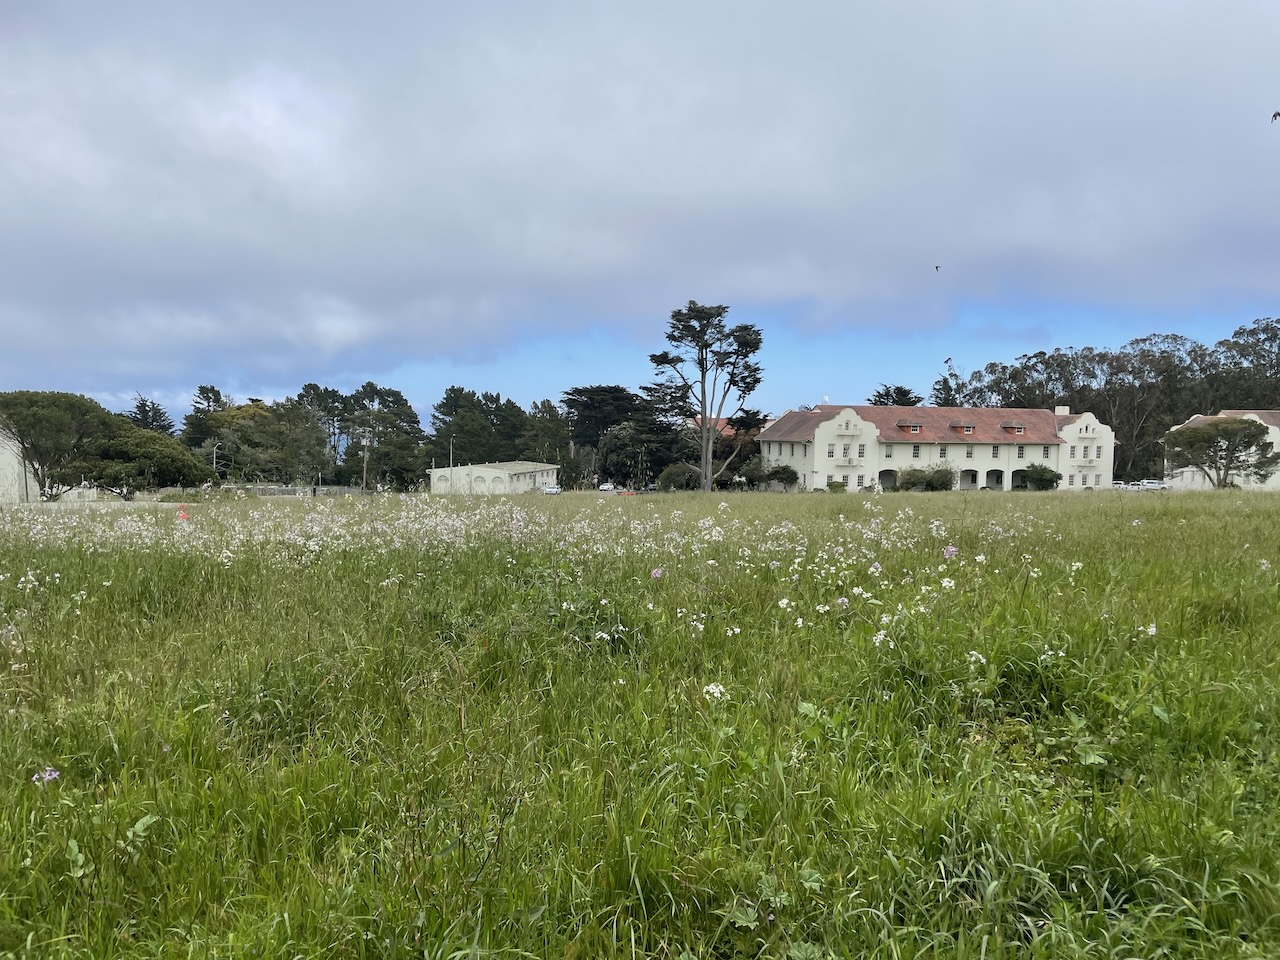 An overgrown wild meadow with a mix of native and invasive species, in the background former military buildings in a Spanish revival style